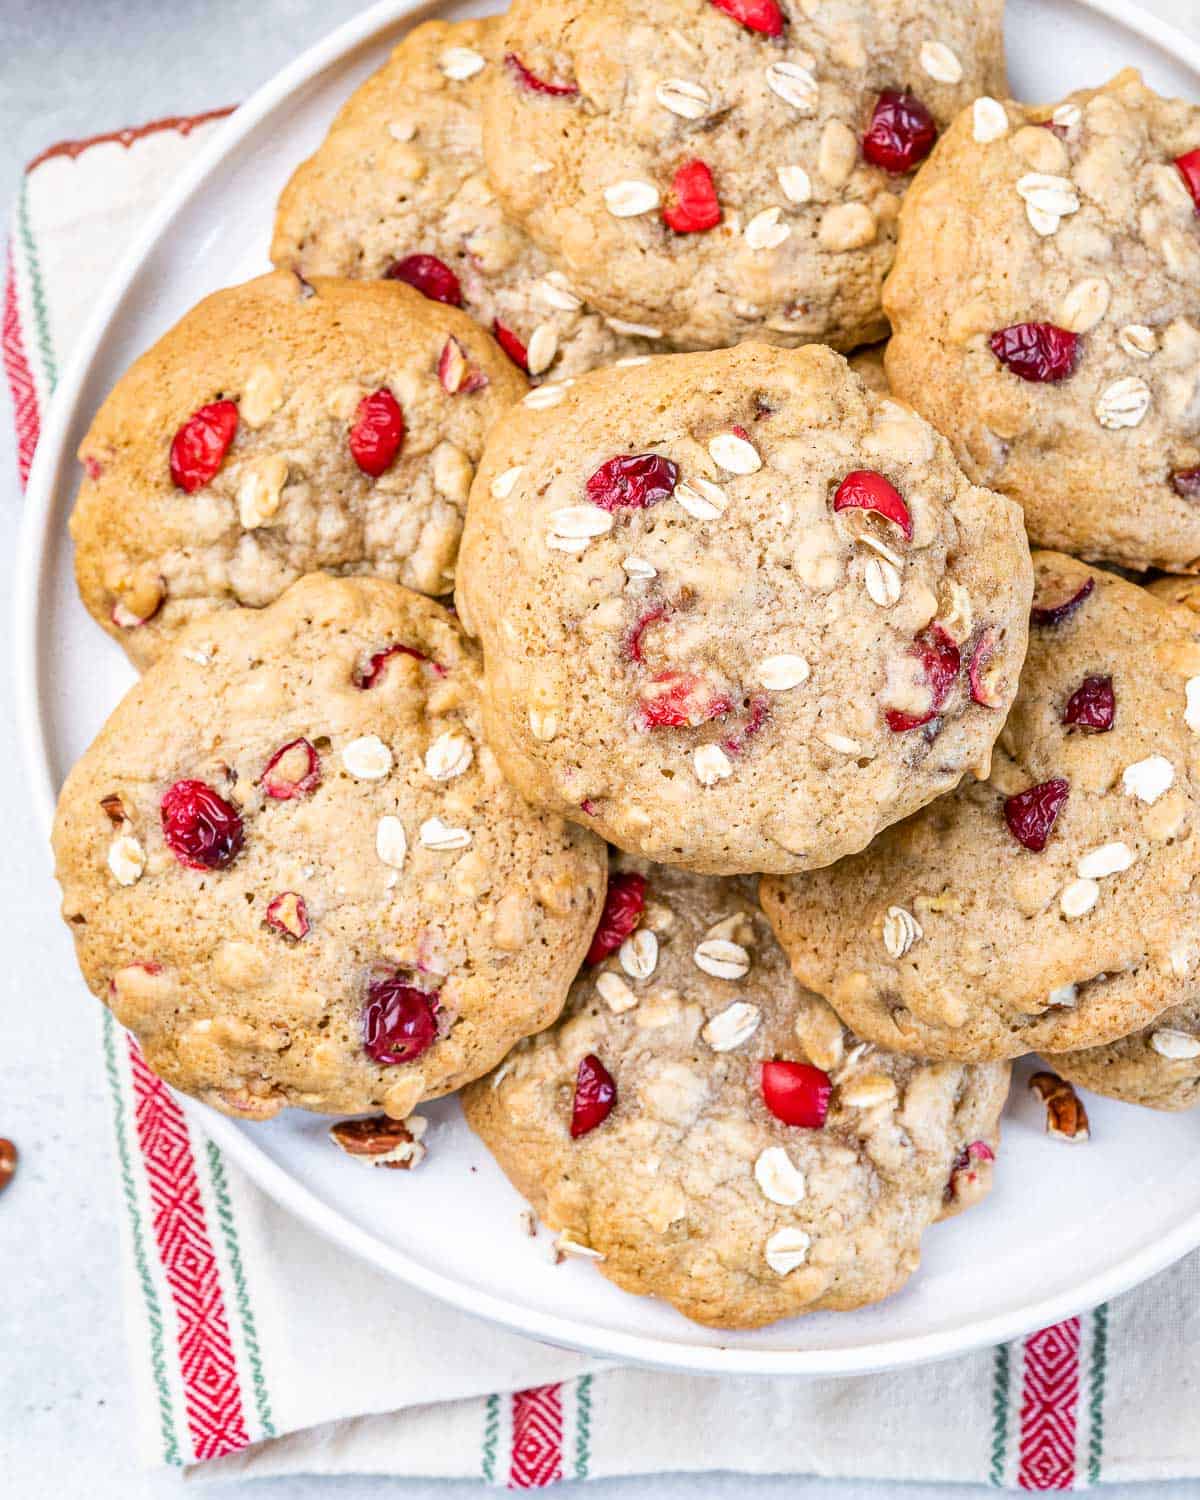 Closeup view of cranberry oatmeal cookies on a plate.